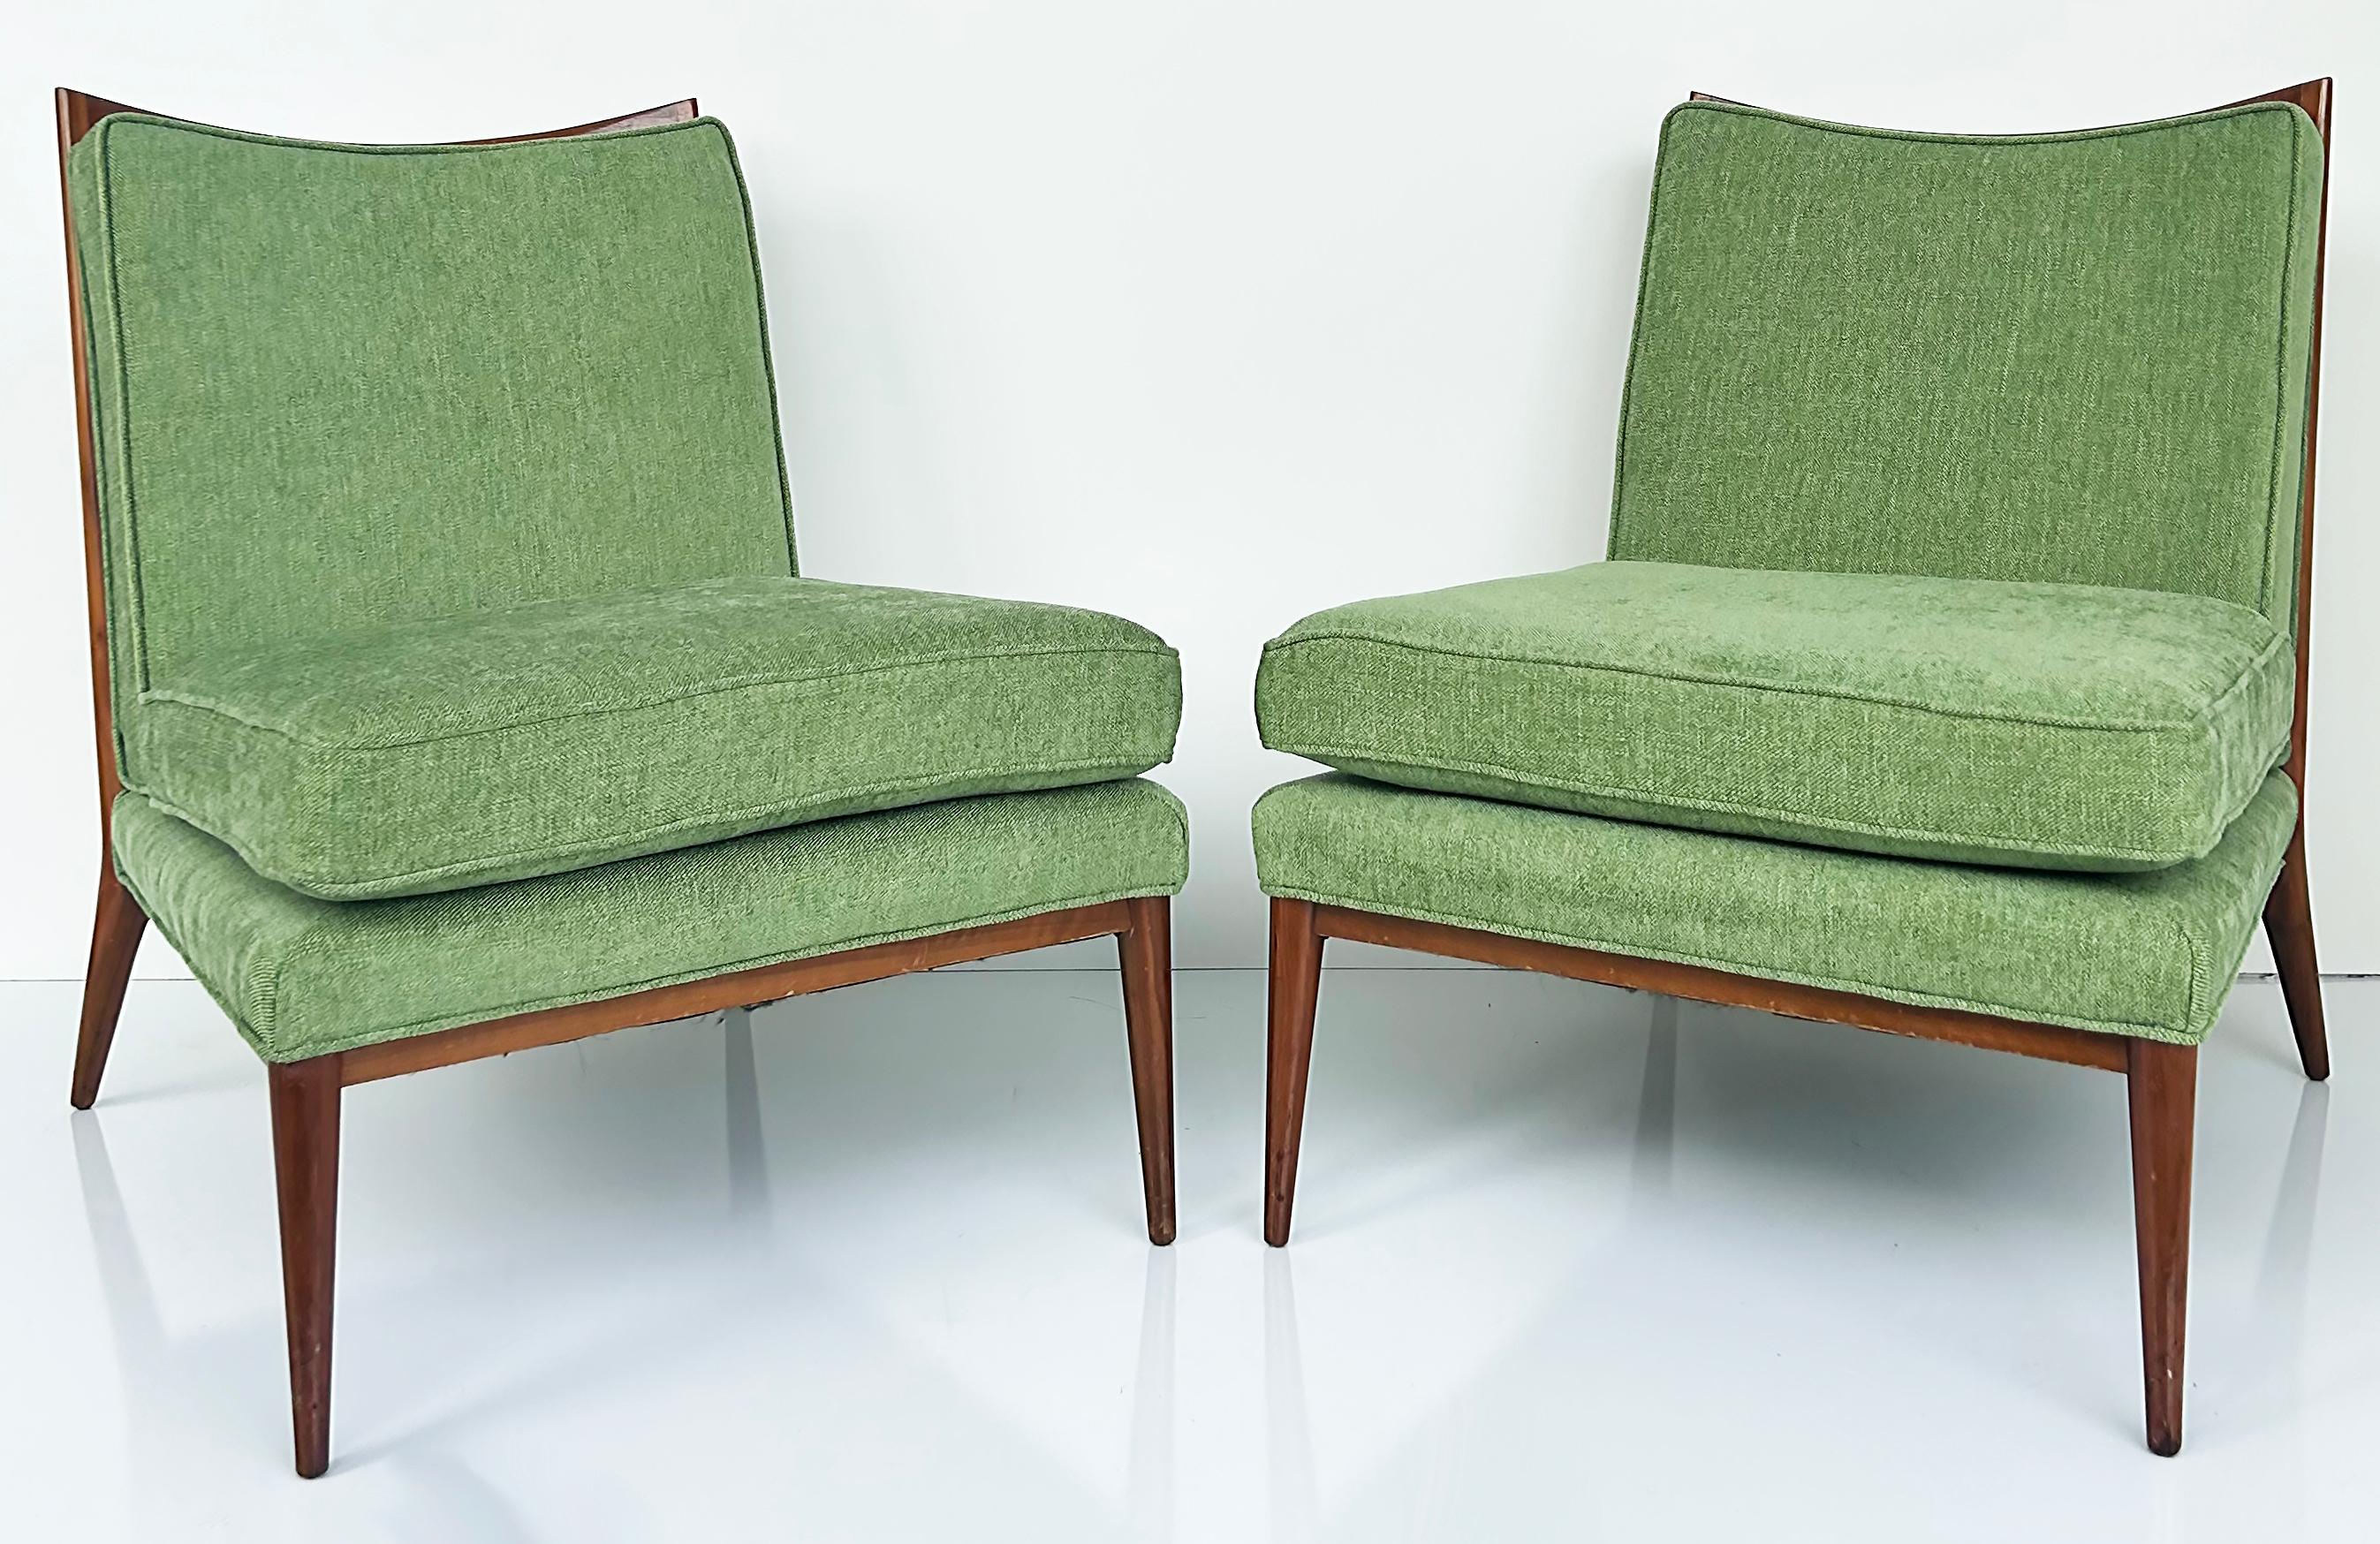 1950s Paul McCobb Directional Walnut Slipper Chairs, Pair Newly Upholstered  For Sale 4